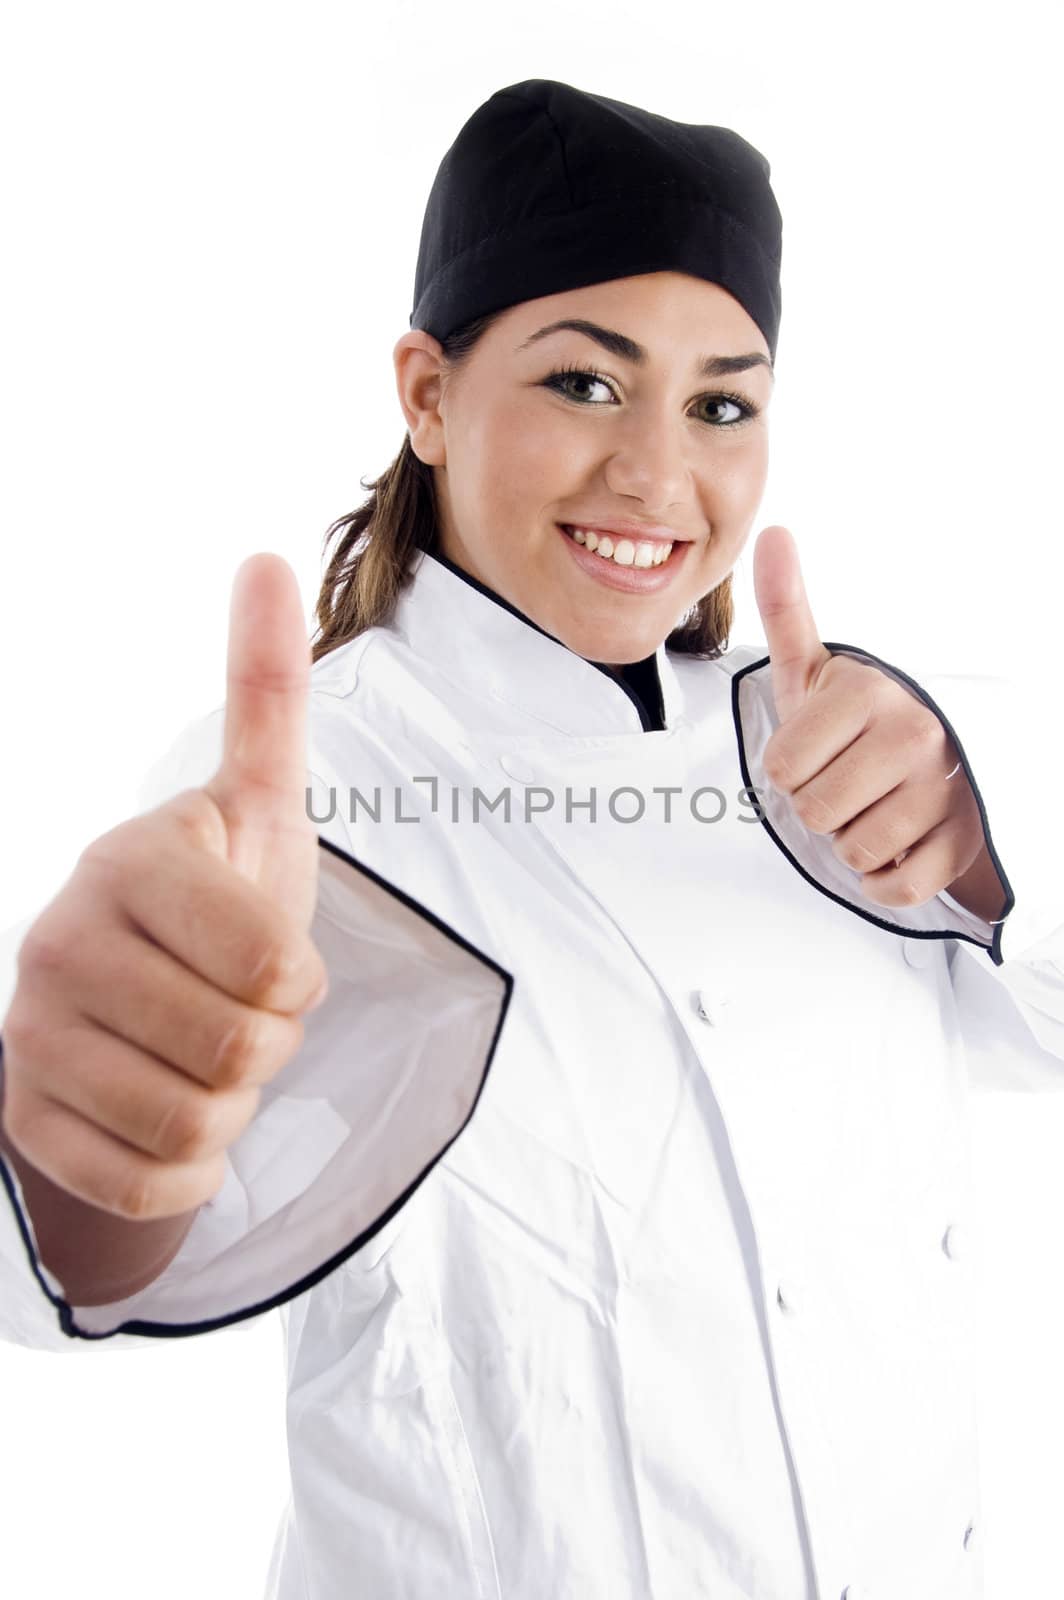 successful female chef showing thumbs up on an isolated white background